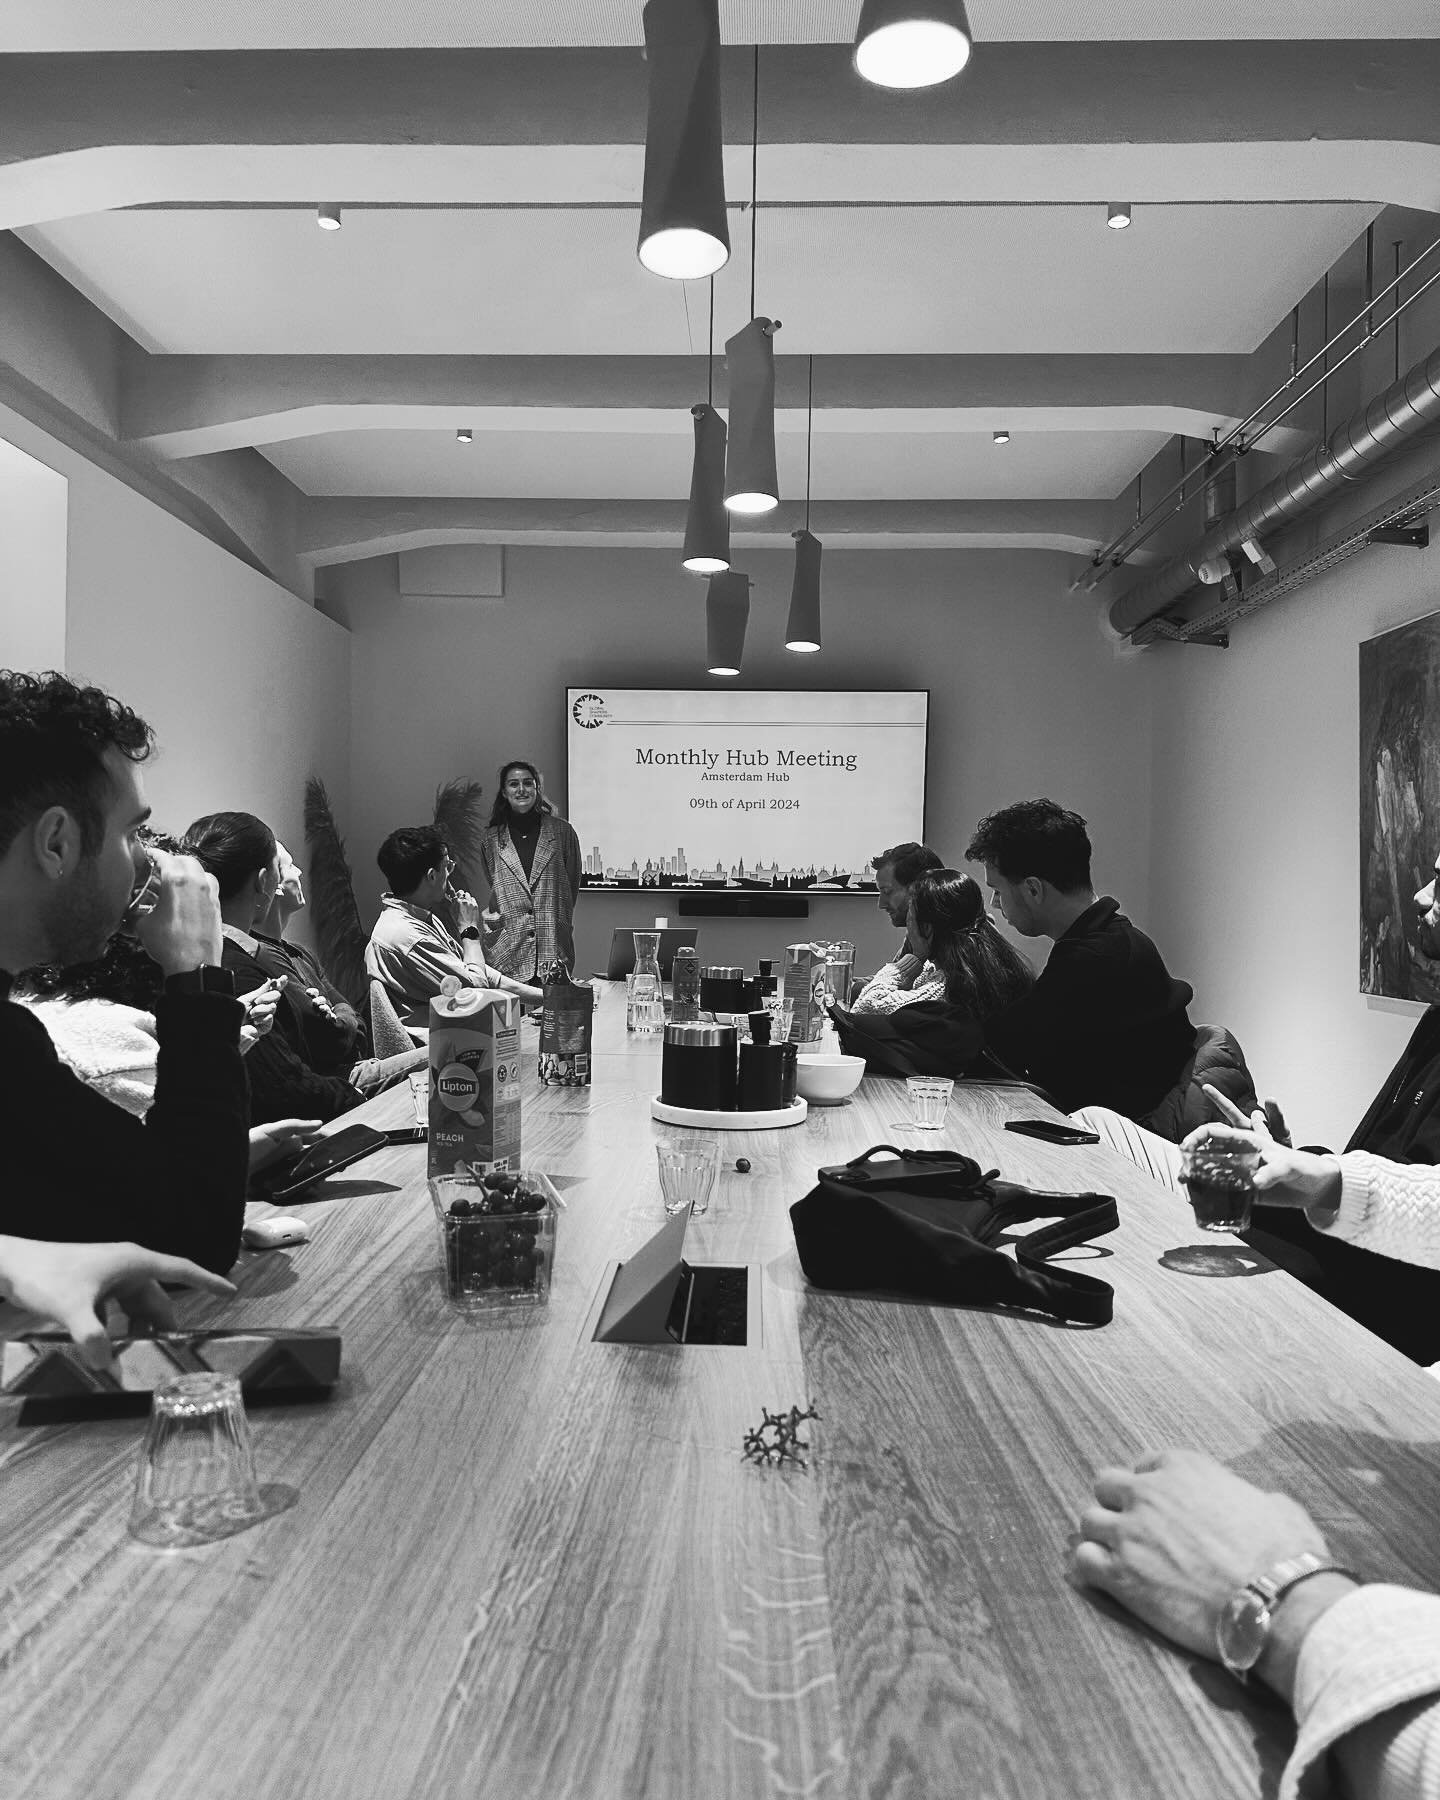 Every month we get together for our monthly hub meeting. 💡
In this session we hear updates from the board, we look back on project successes and we look ahead to activities and events for the coming month. 📊

Thanks to @trueprice_org for hosting us